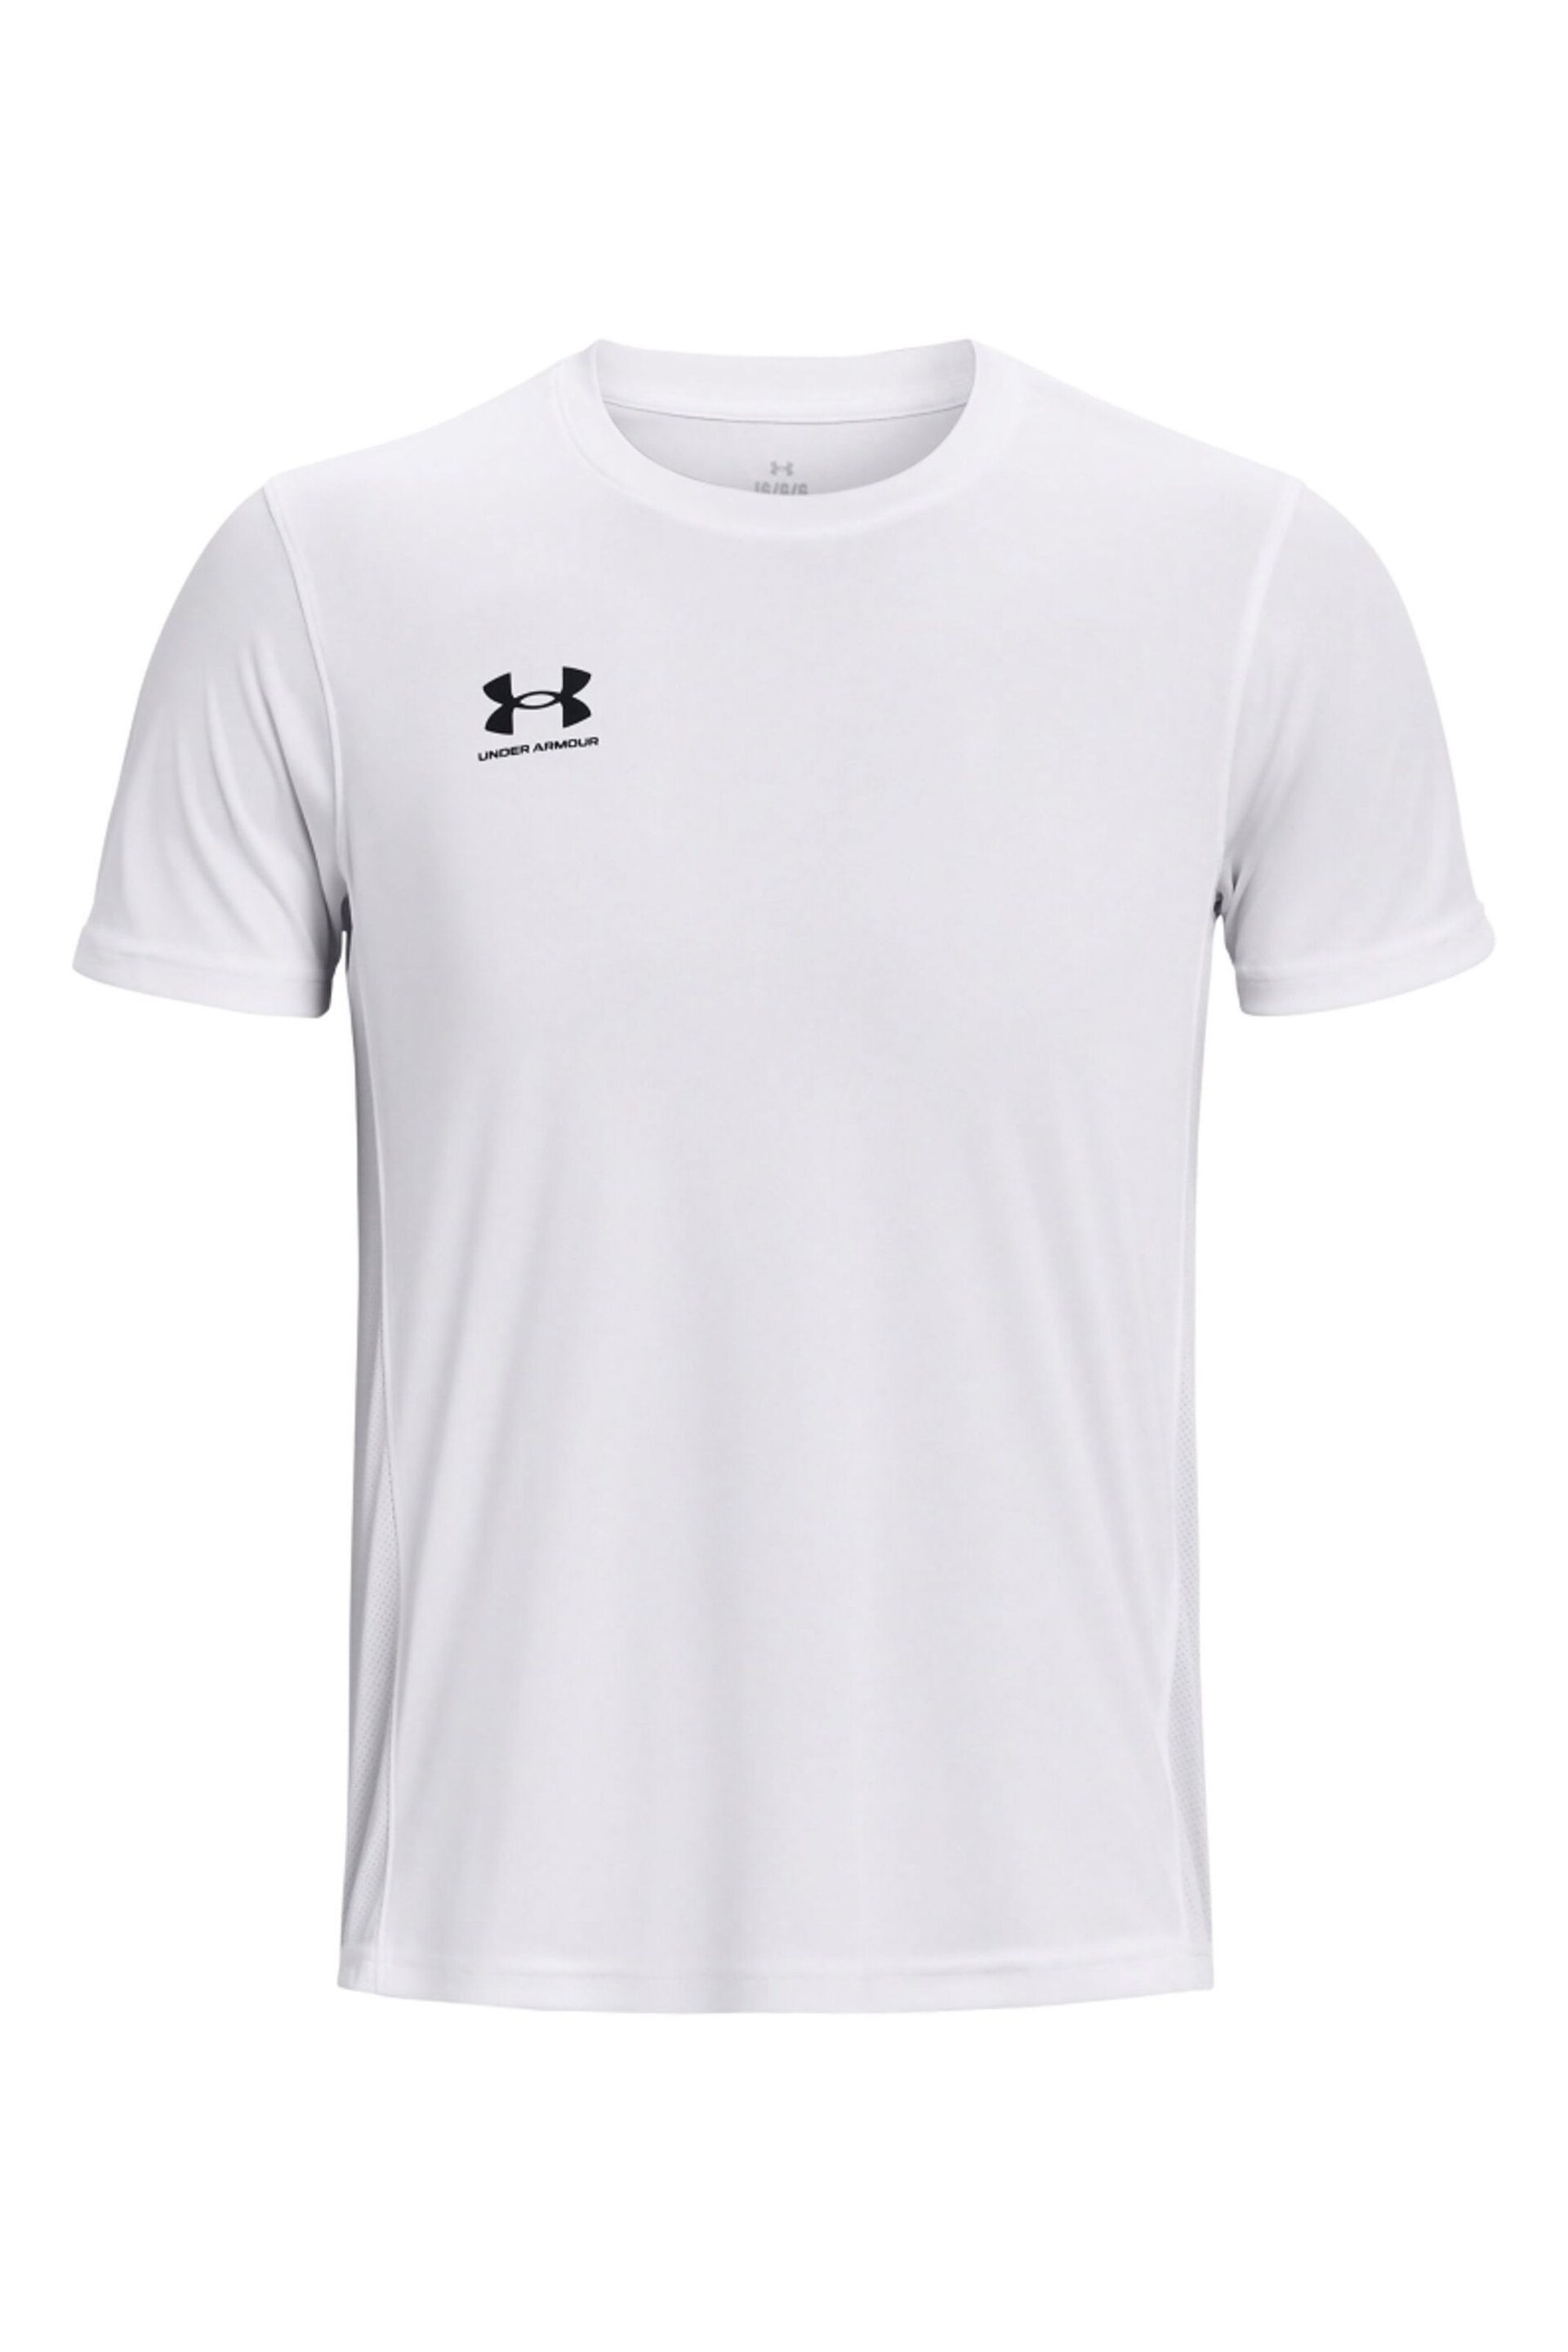 Under Armour White Challenger Train Short Sleeve T-Shirt - Image 5 of 6